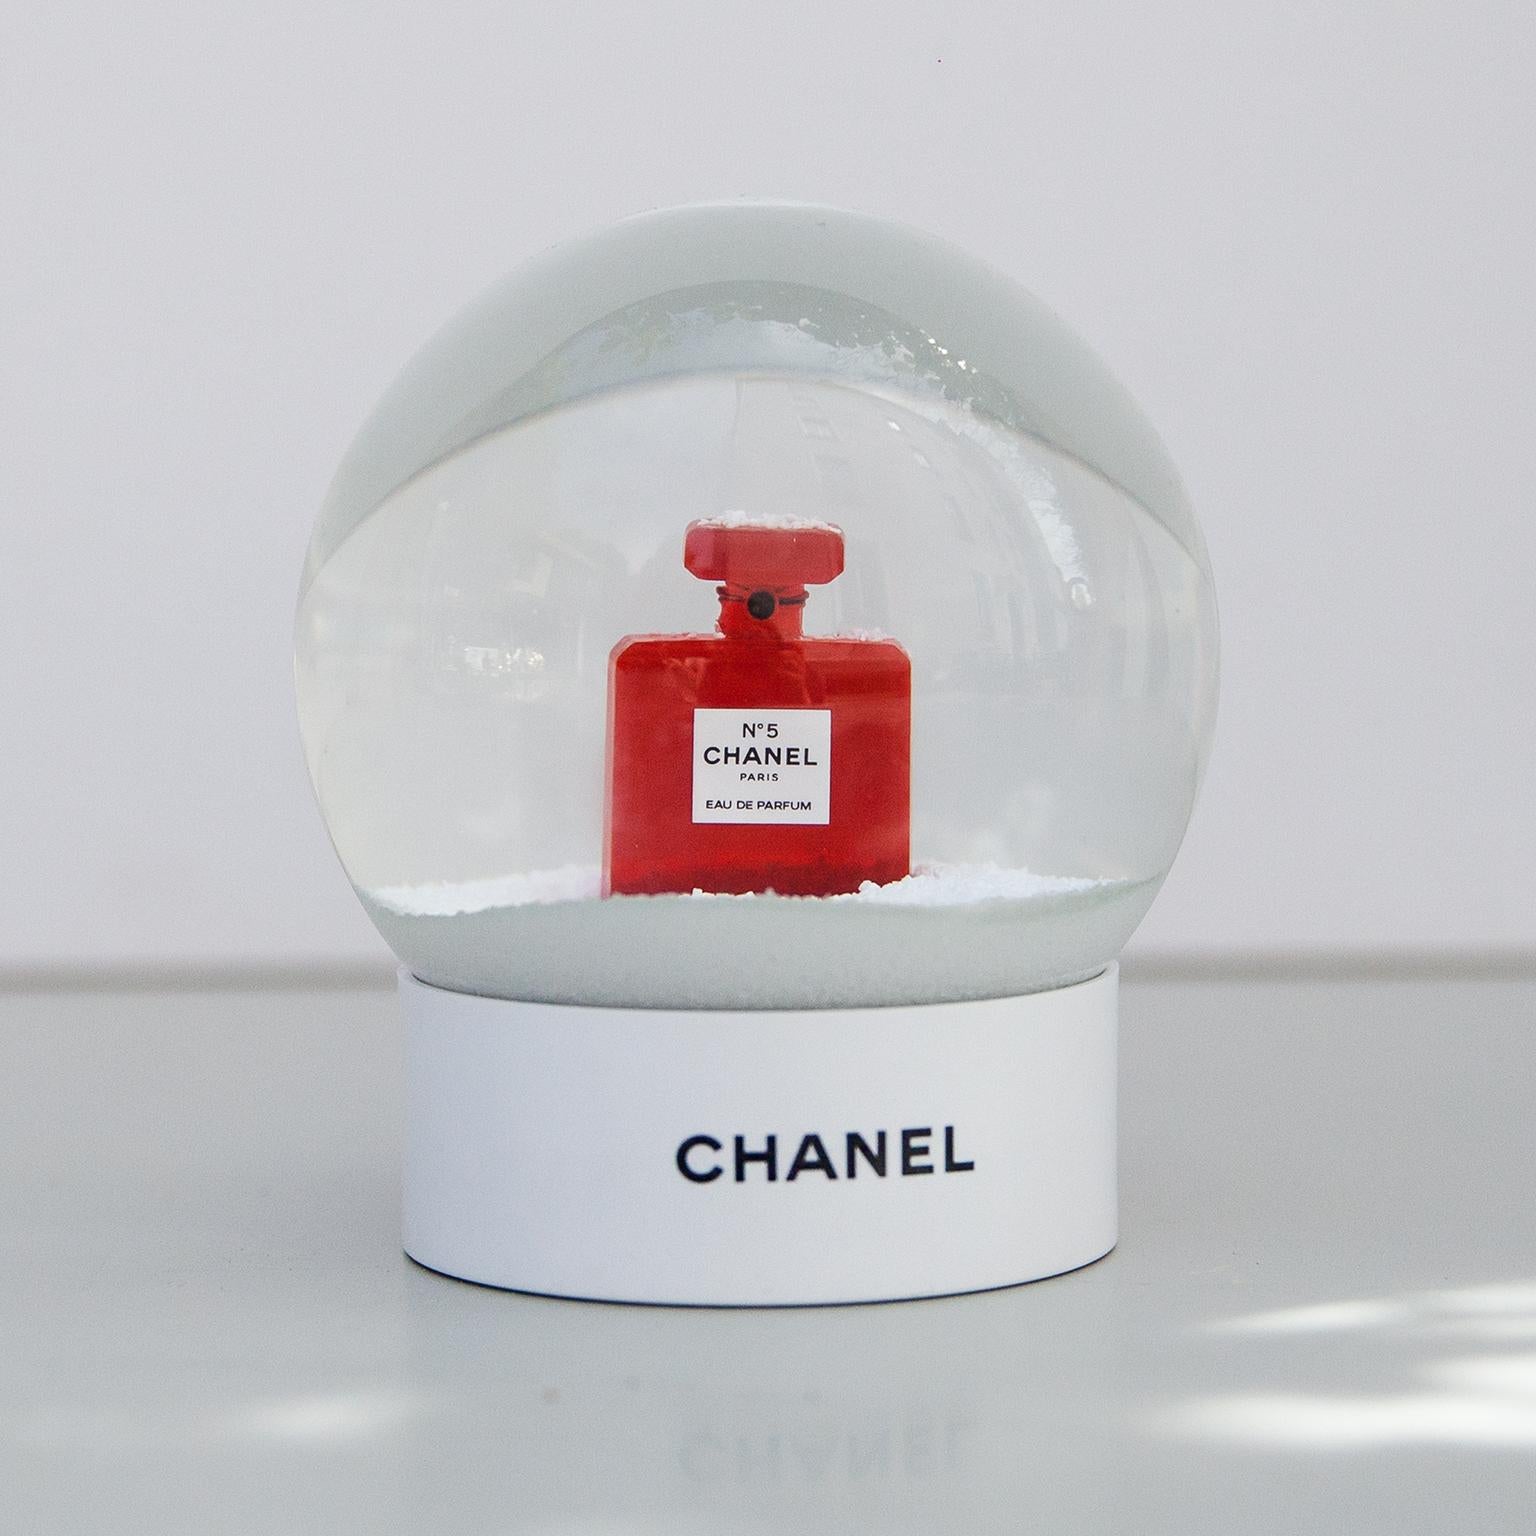 Rare limited edition of a Chanel Snow Ball, which are only for VIP Customers in excellent condition and with the original box.
It features the iconic Chanel Number 5 perfume bottle, a very decorative must have object for Chanel lovers.
